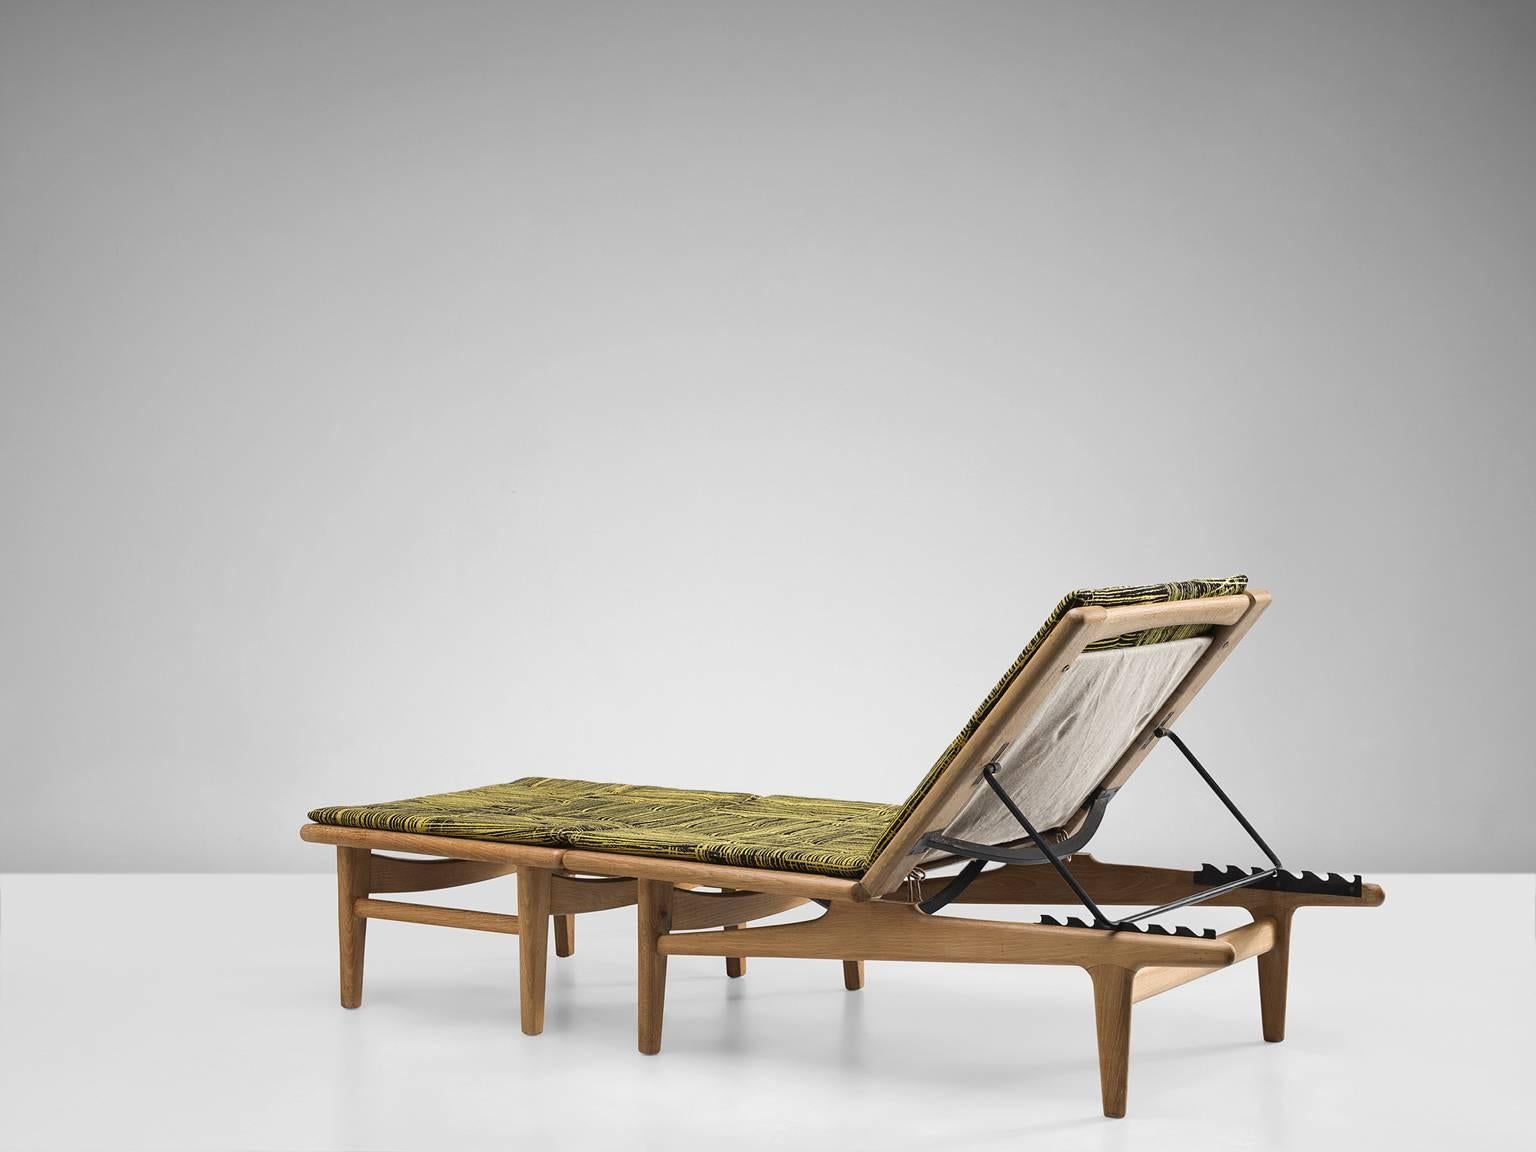 Danish Hans J. Wegner Daybed in Oak and Original Black and Yellow Upholstery